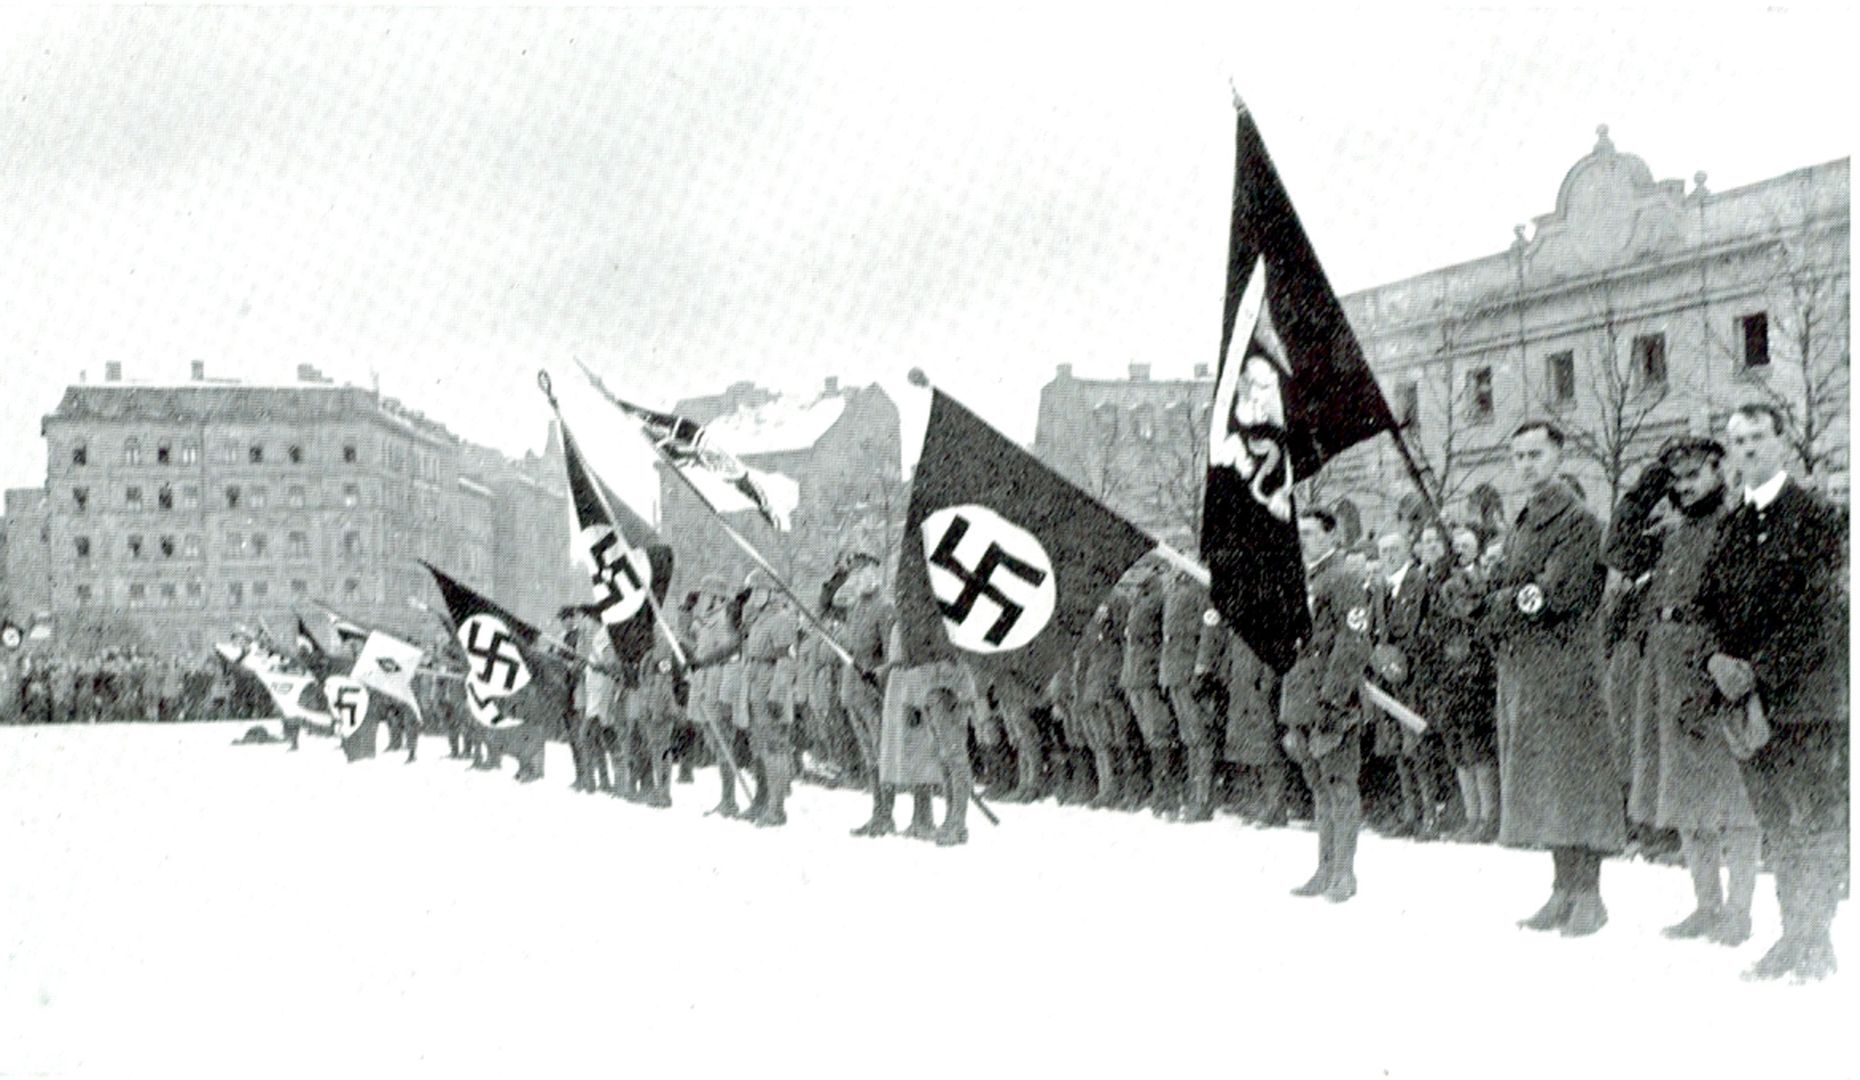 <p>In 1921, Adolf Hitler took the helm of the <a href="https://www.history.com/topics/germany/beer-hall-putsch">Nazi Party</a>, which, at the time, was a new political group that endorsed German pride and anti-Semitism. The party pushed back against the terms of the Treaty of Versailles, which forced Germany to make numerous concessions and pay reparations that led to widespread poverty in the country.</p>